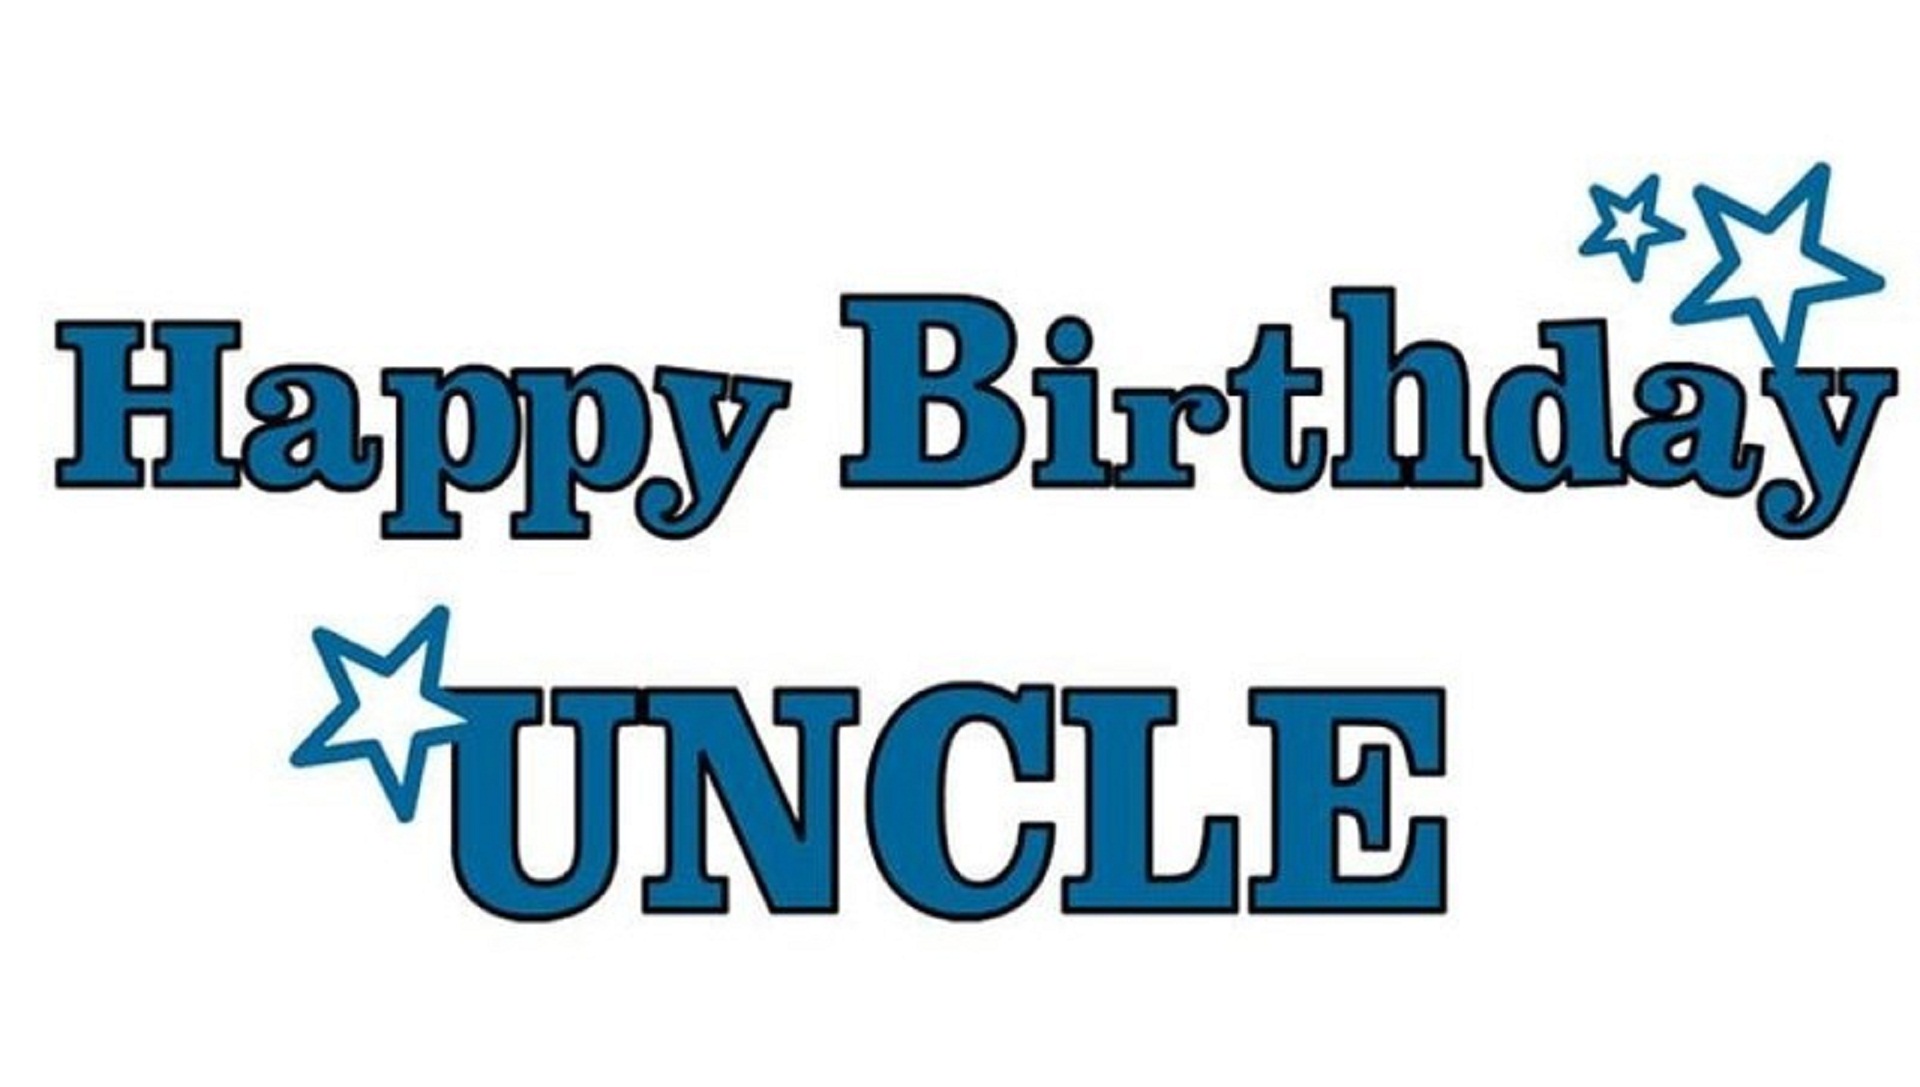 birthday wishes for uncle hd image